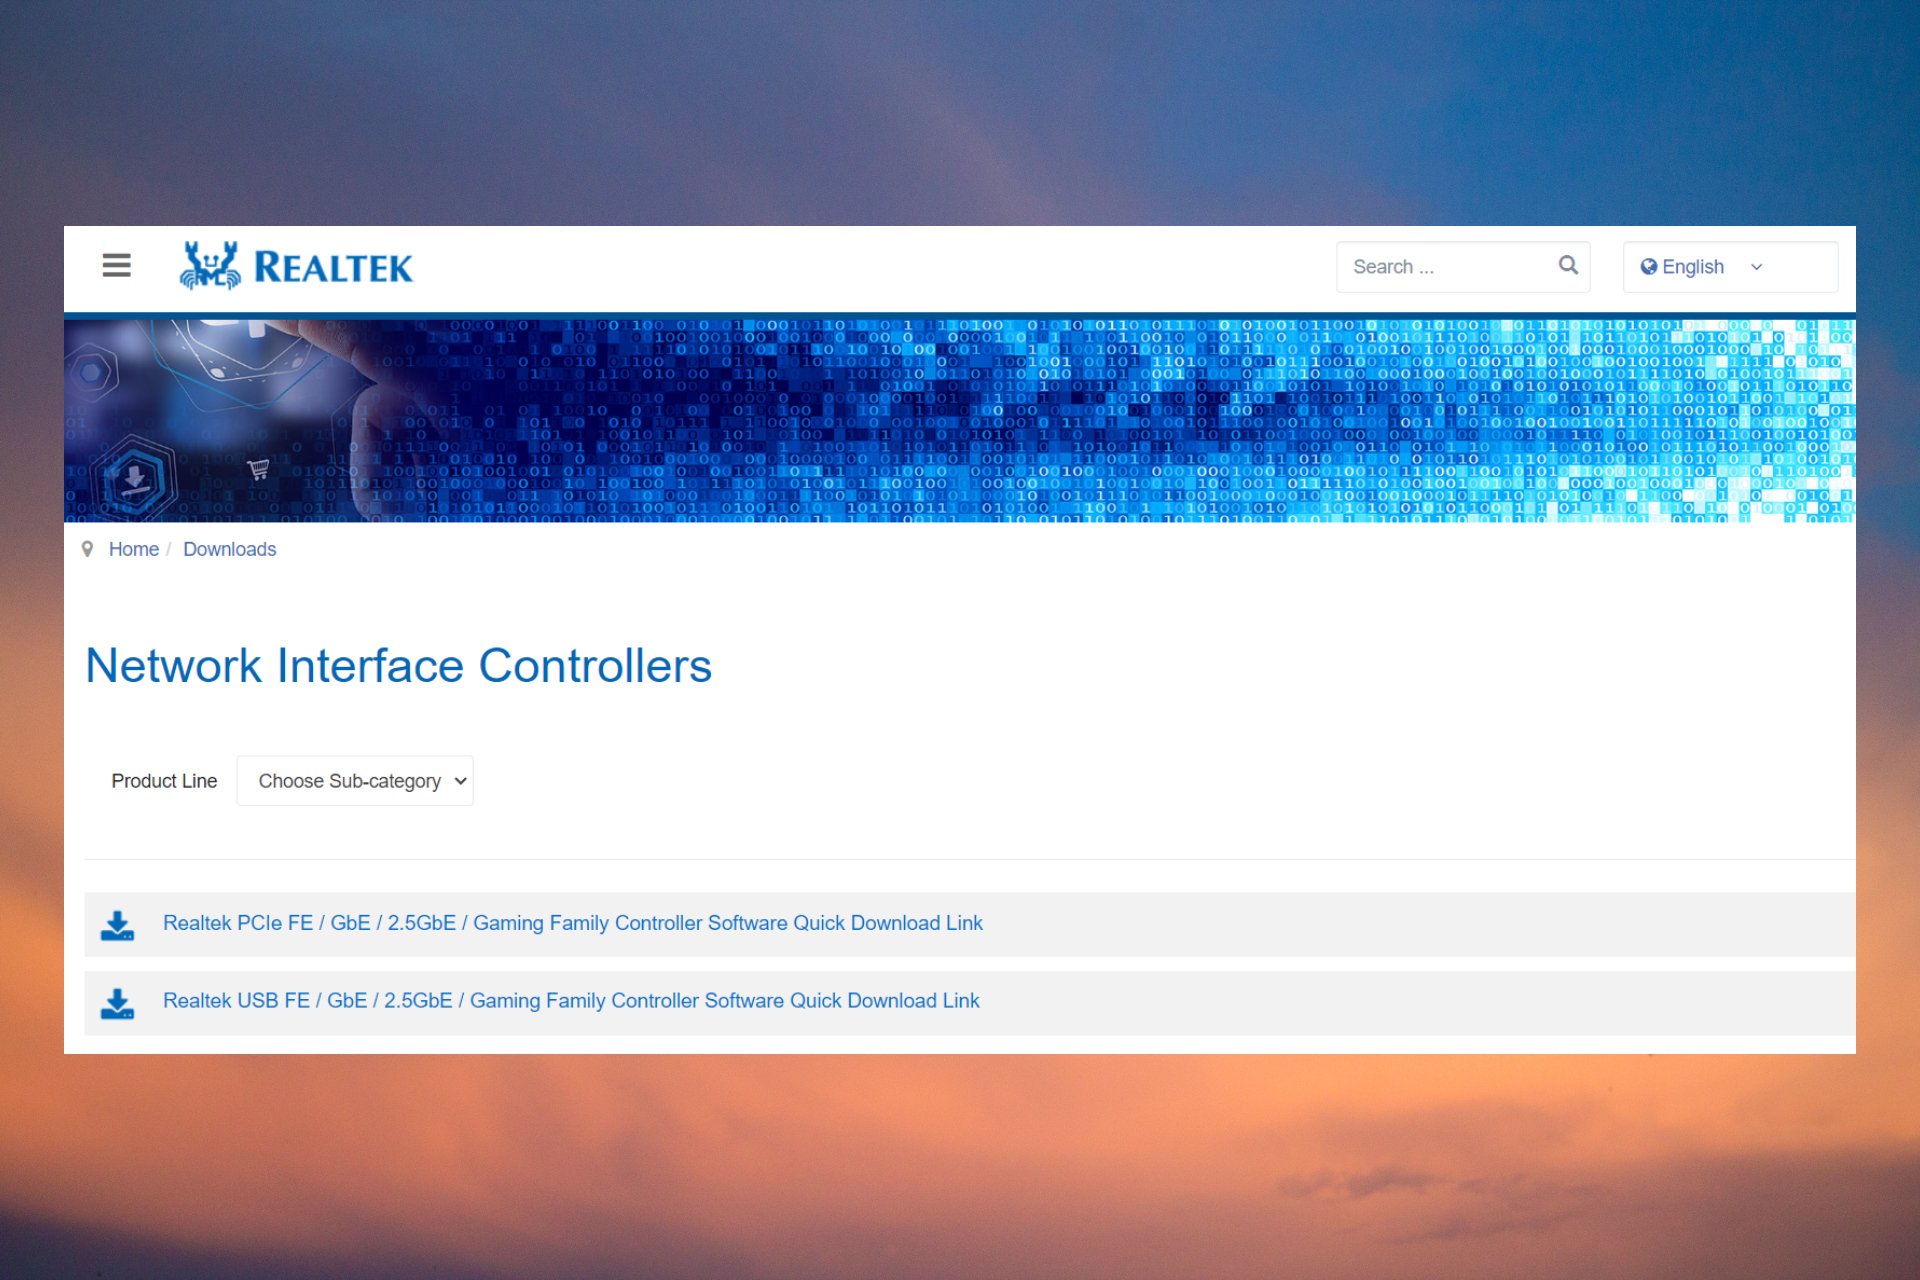 Get the Latest Realtek Wi-Fi Driver for Windows 11 [HP, Asus, Dell, Lenovo]